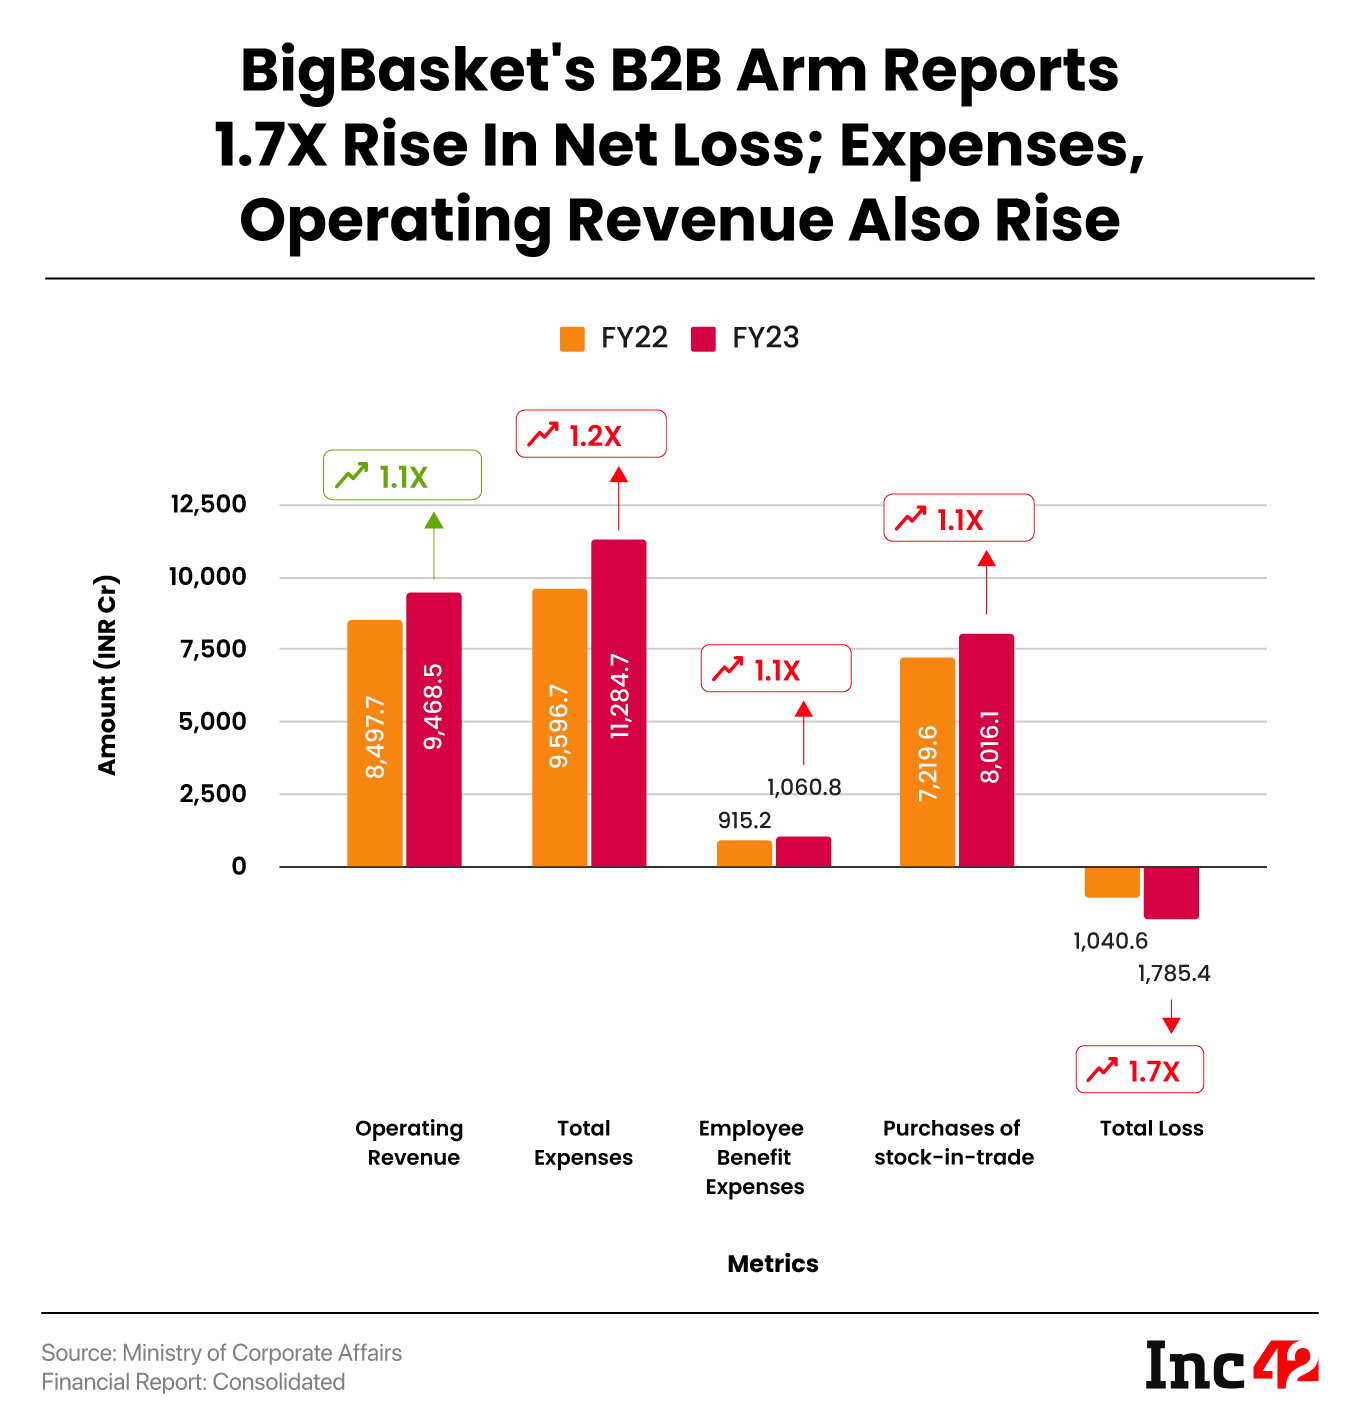  BigBasket's B2B Arm Reports 1.7X Rise In Net Loss; Expenses, Operating Revenue Also Rise